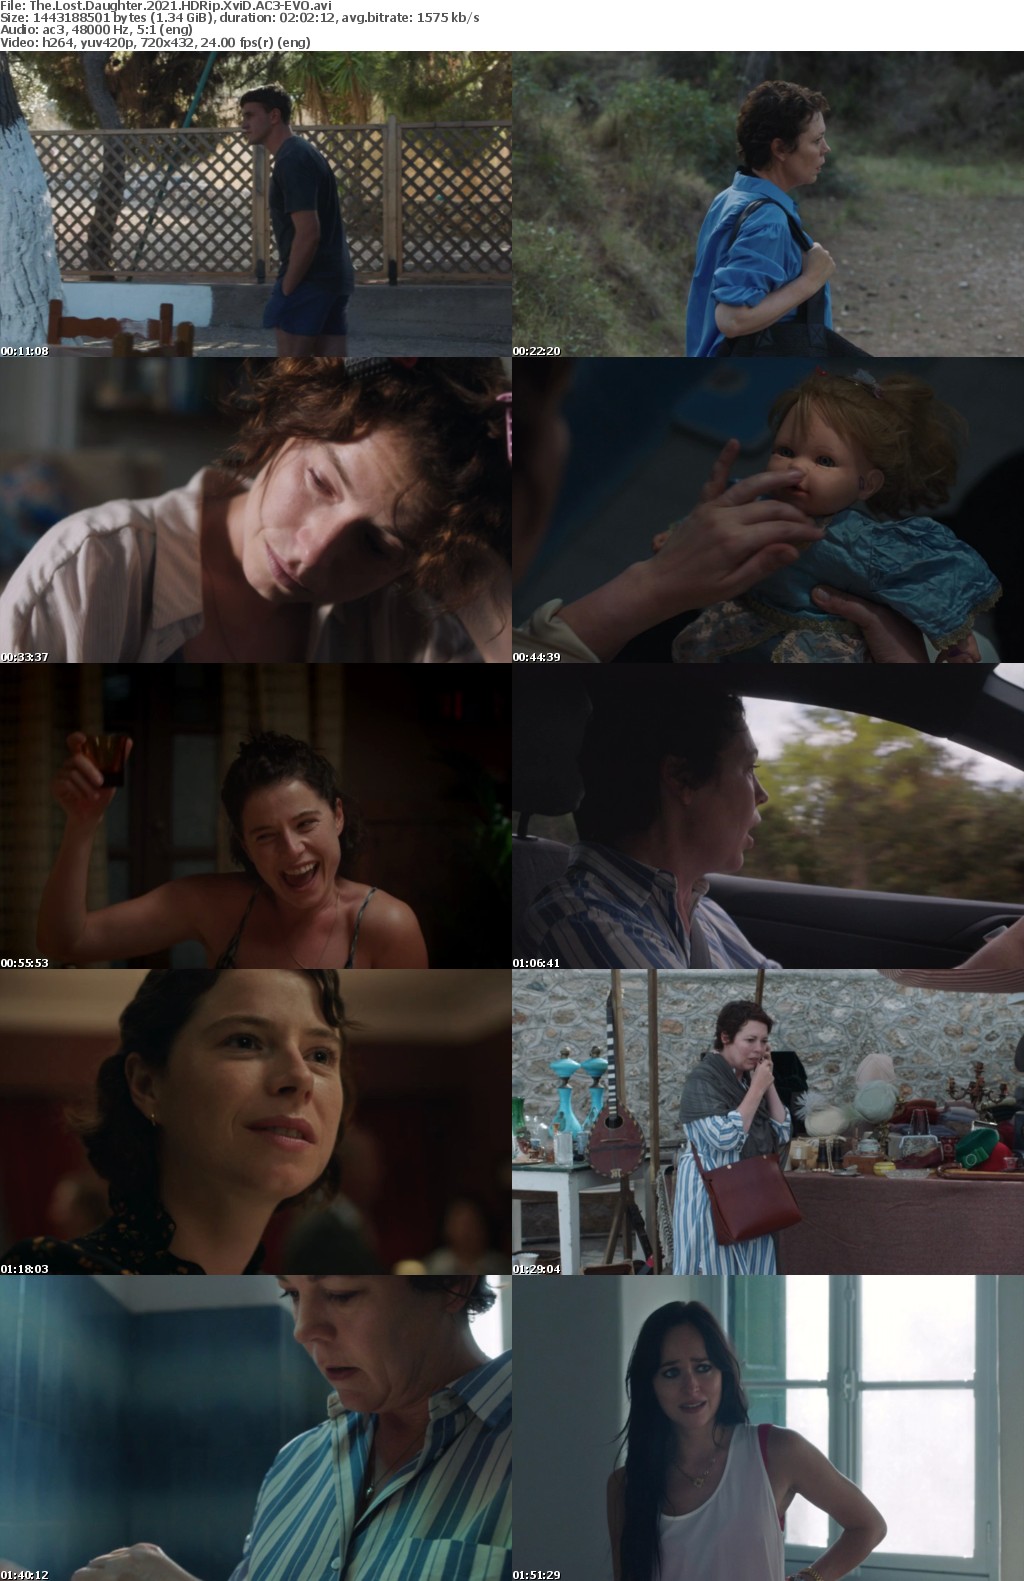 The Lost Daughter 2021 HDRip XviD AC3-EVO